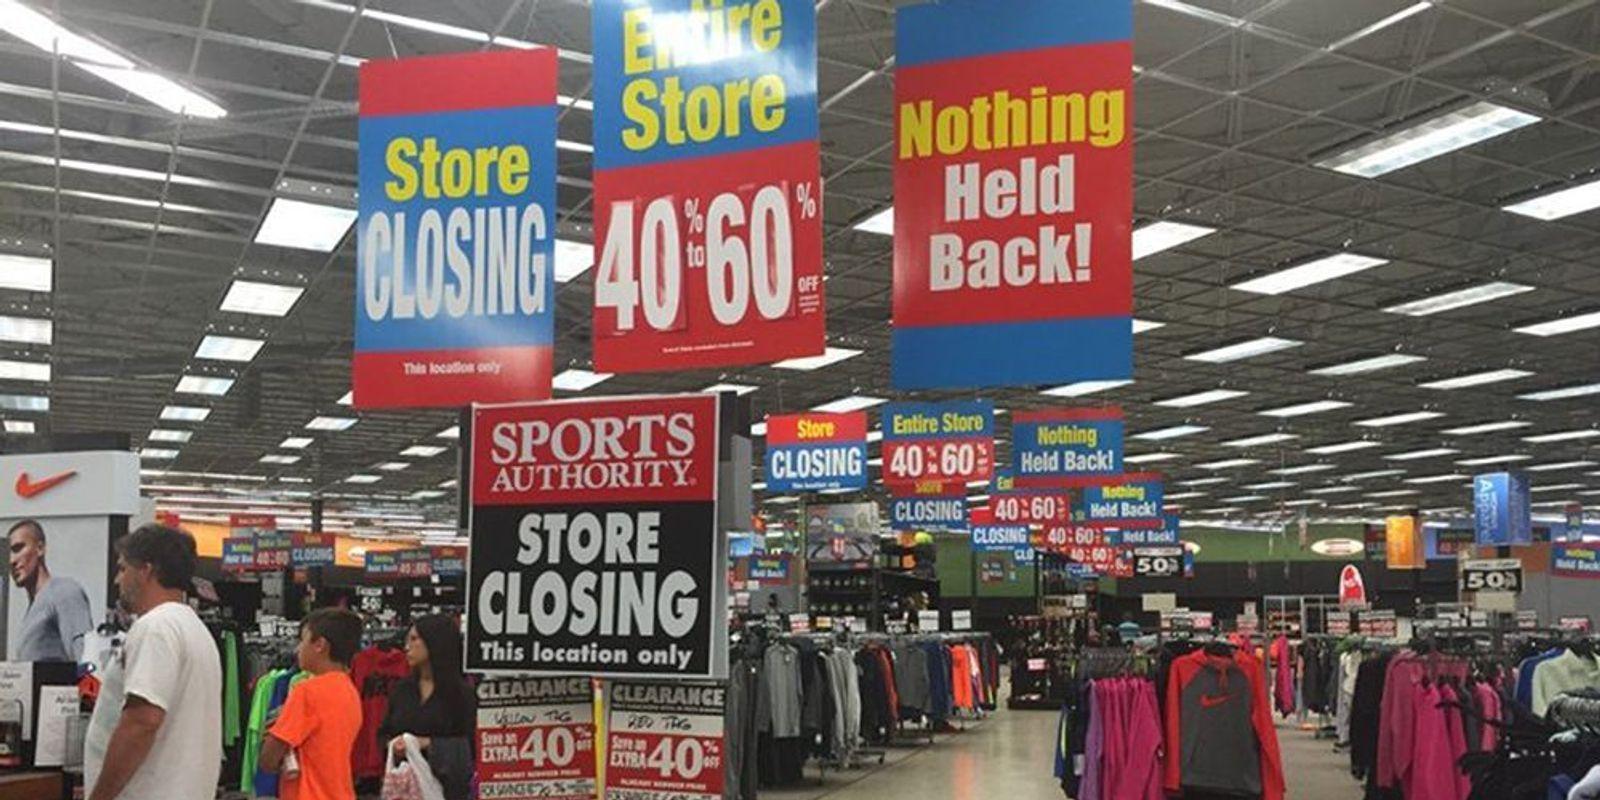 Sports Authority Store Logo - Sports Authority closings can mean good deals, eventually